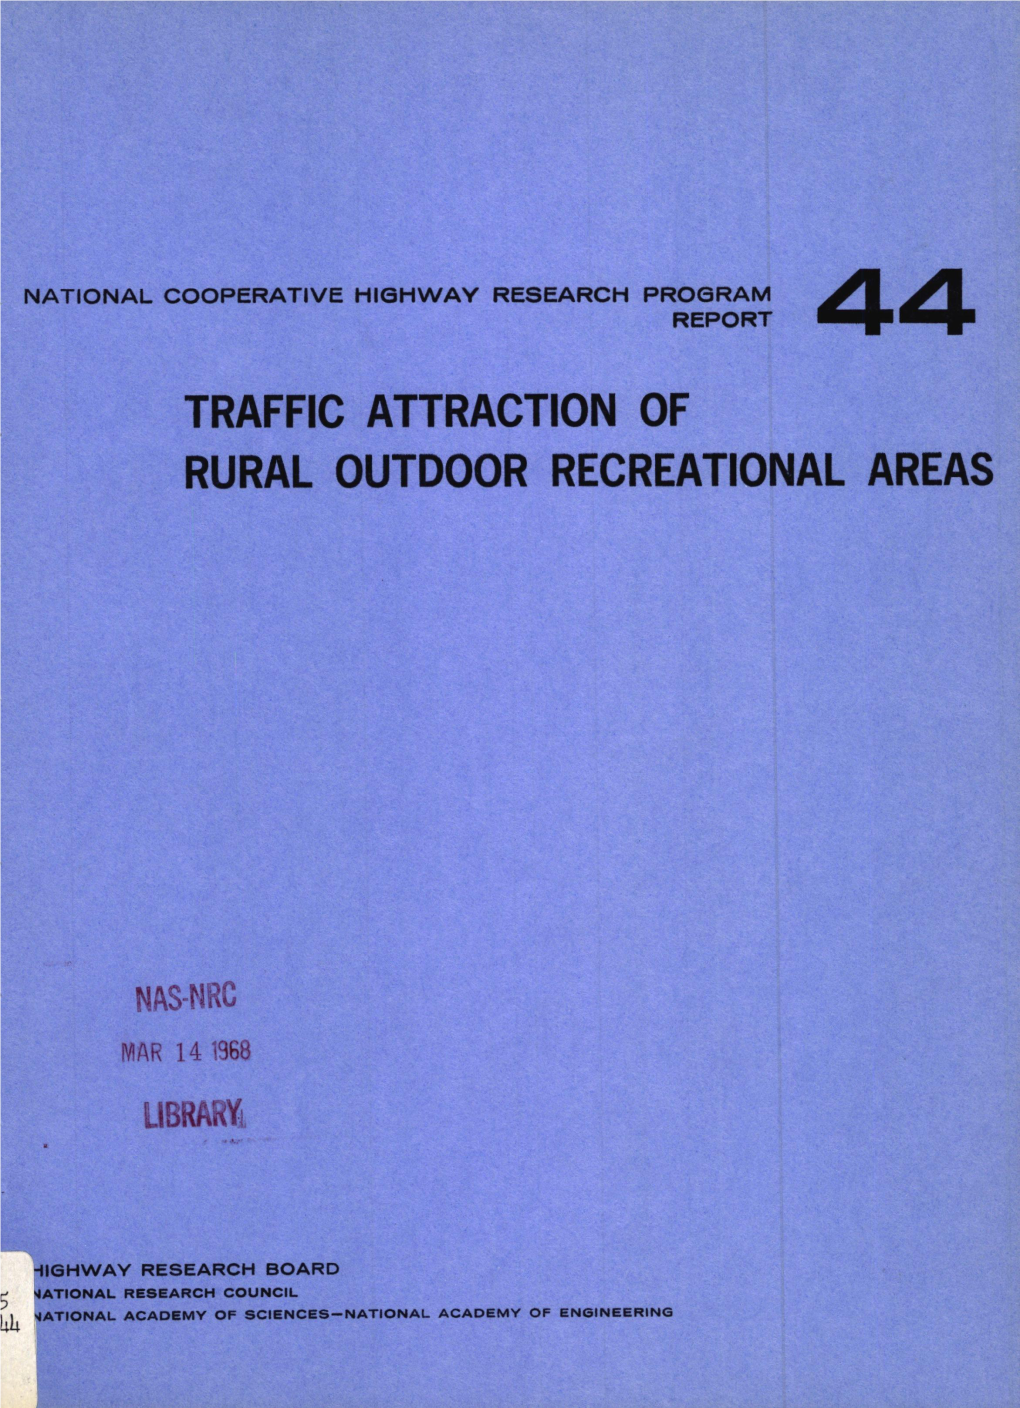 Traffic Attraction of Rural Outdoor Recreational Areas